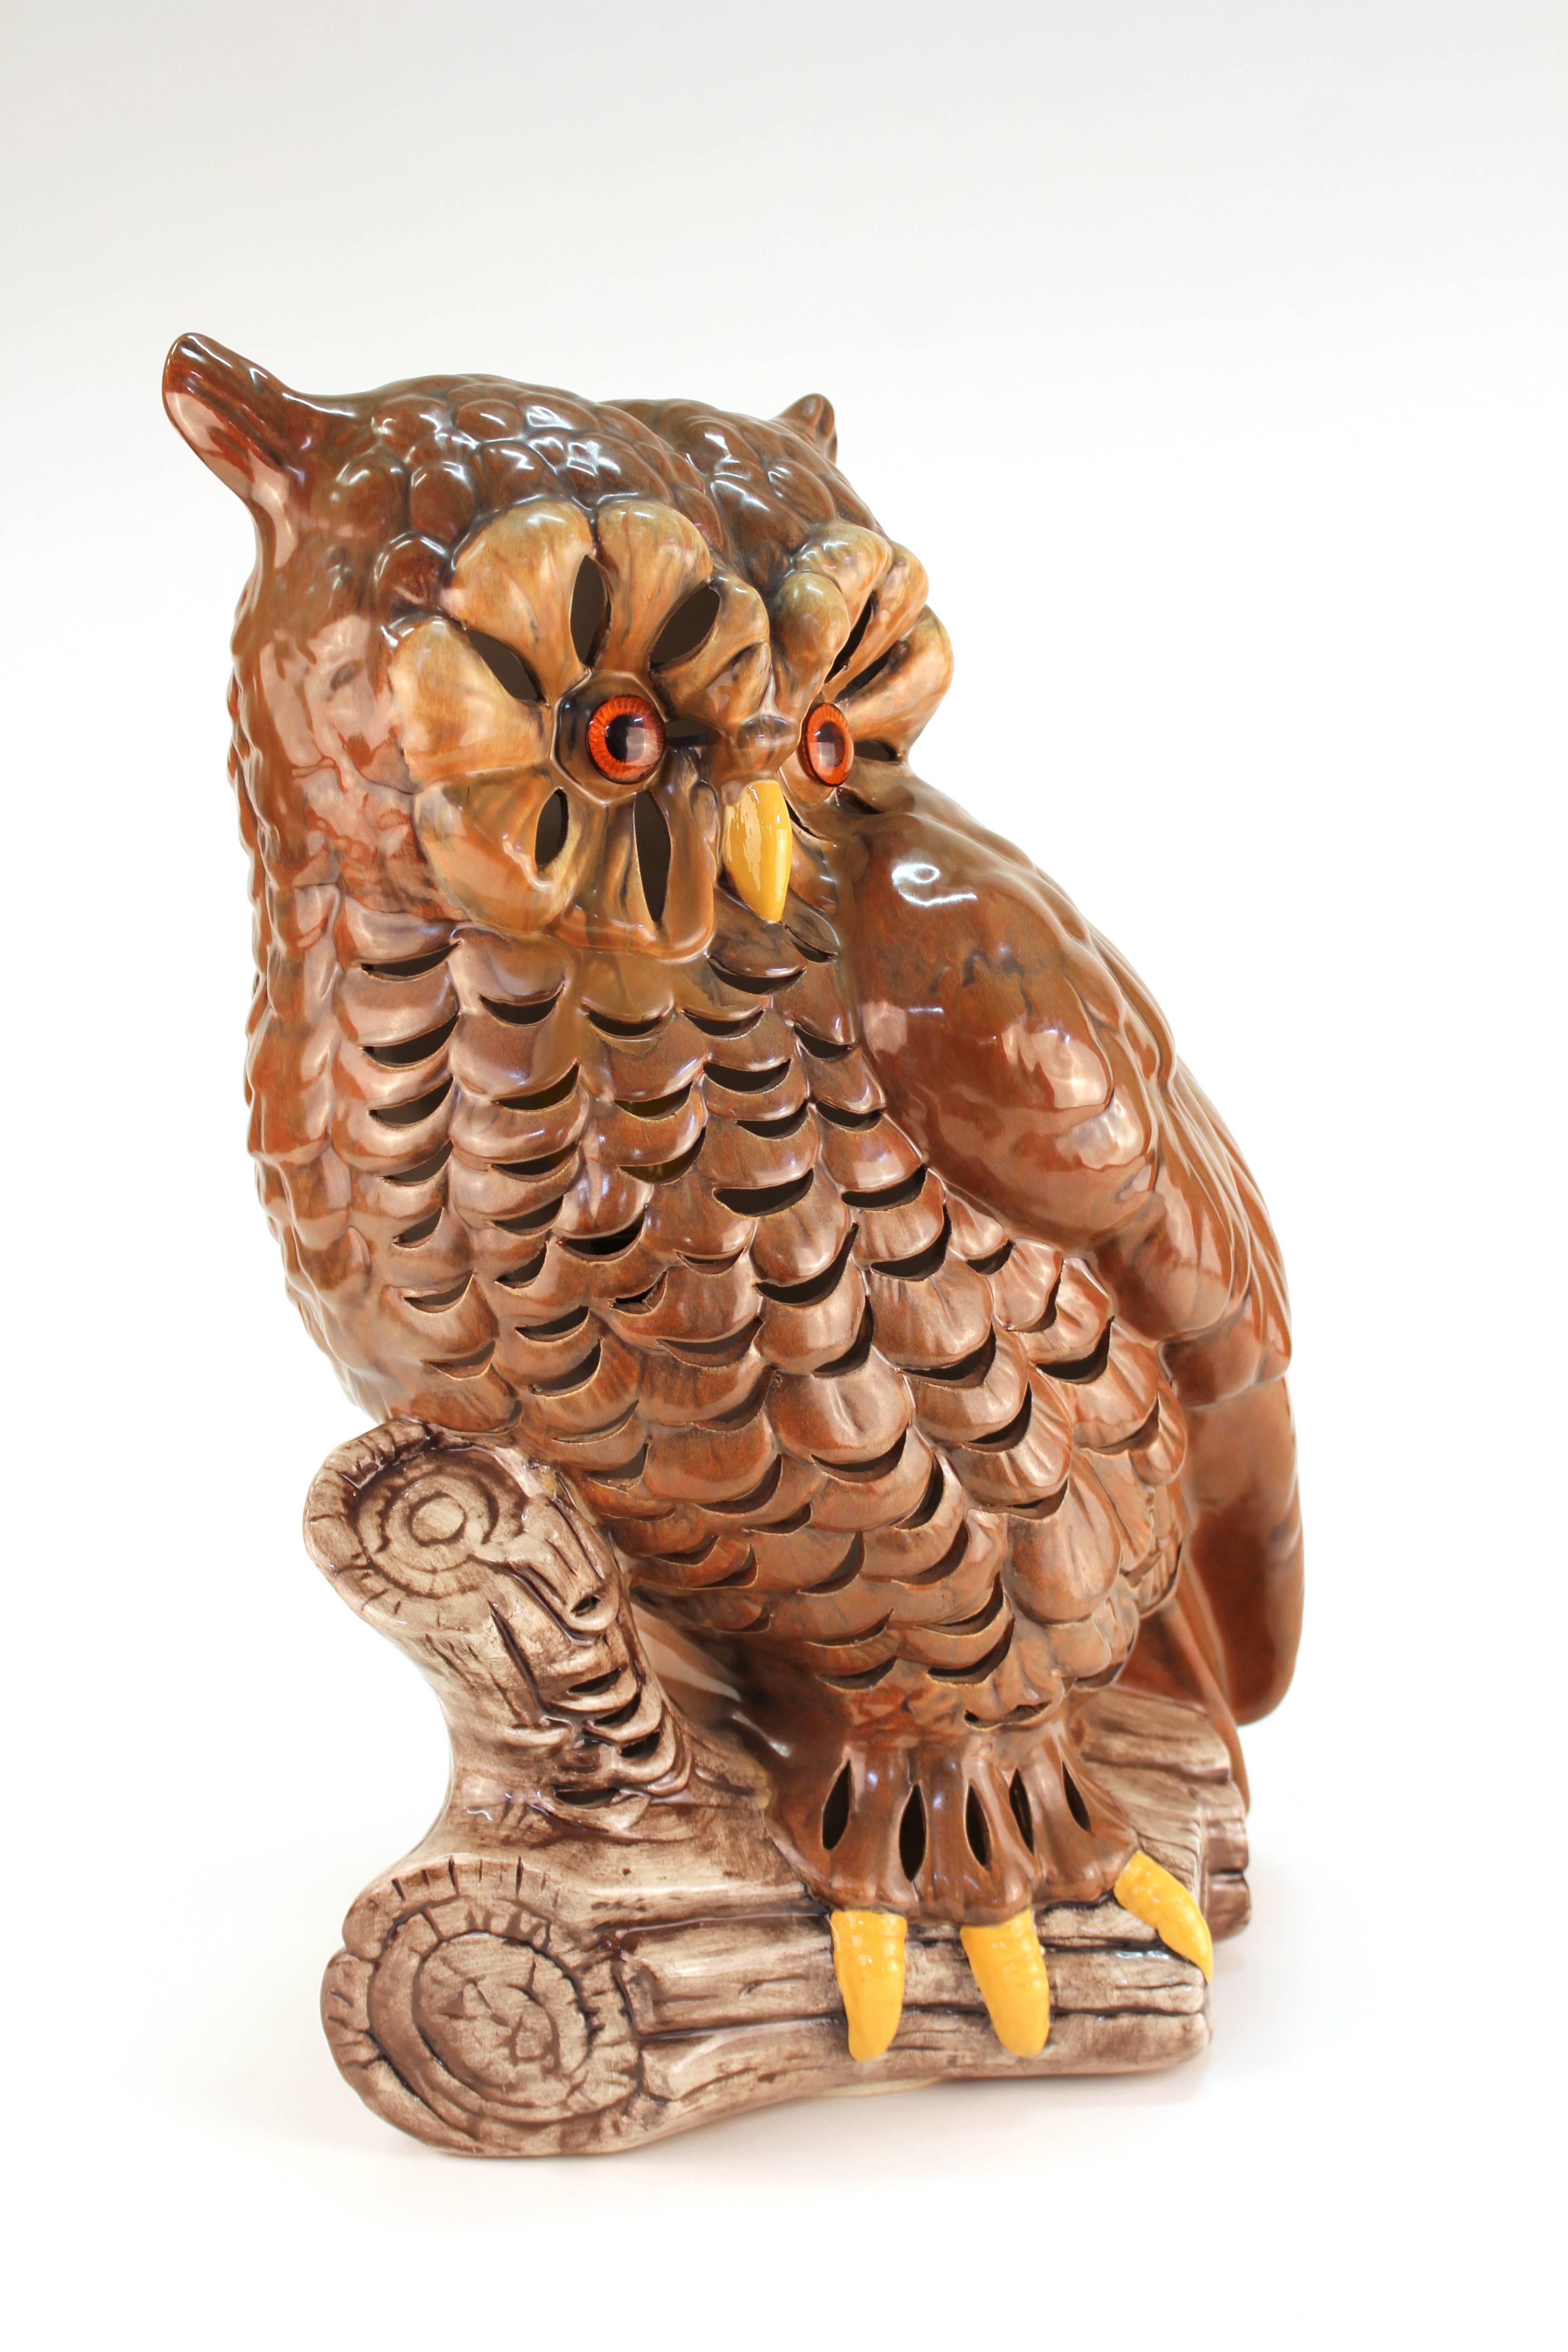 A Mid-Century Modern table lamp in shape of a seated owl. The piece is made of ceramic and was produced in the 1960s in the United States. In very good condition.